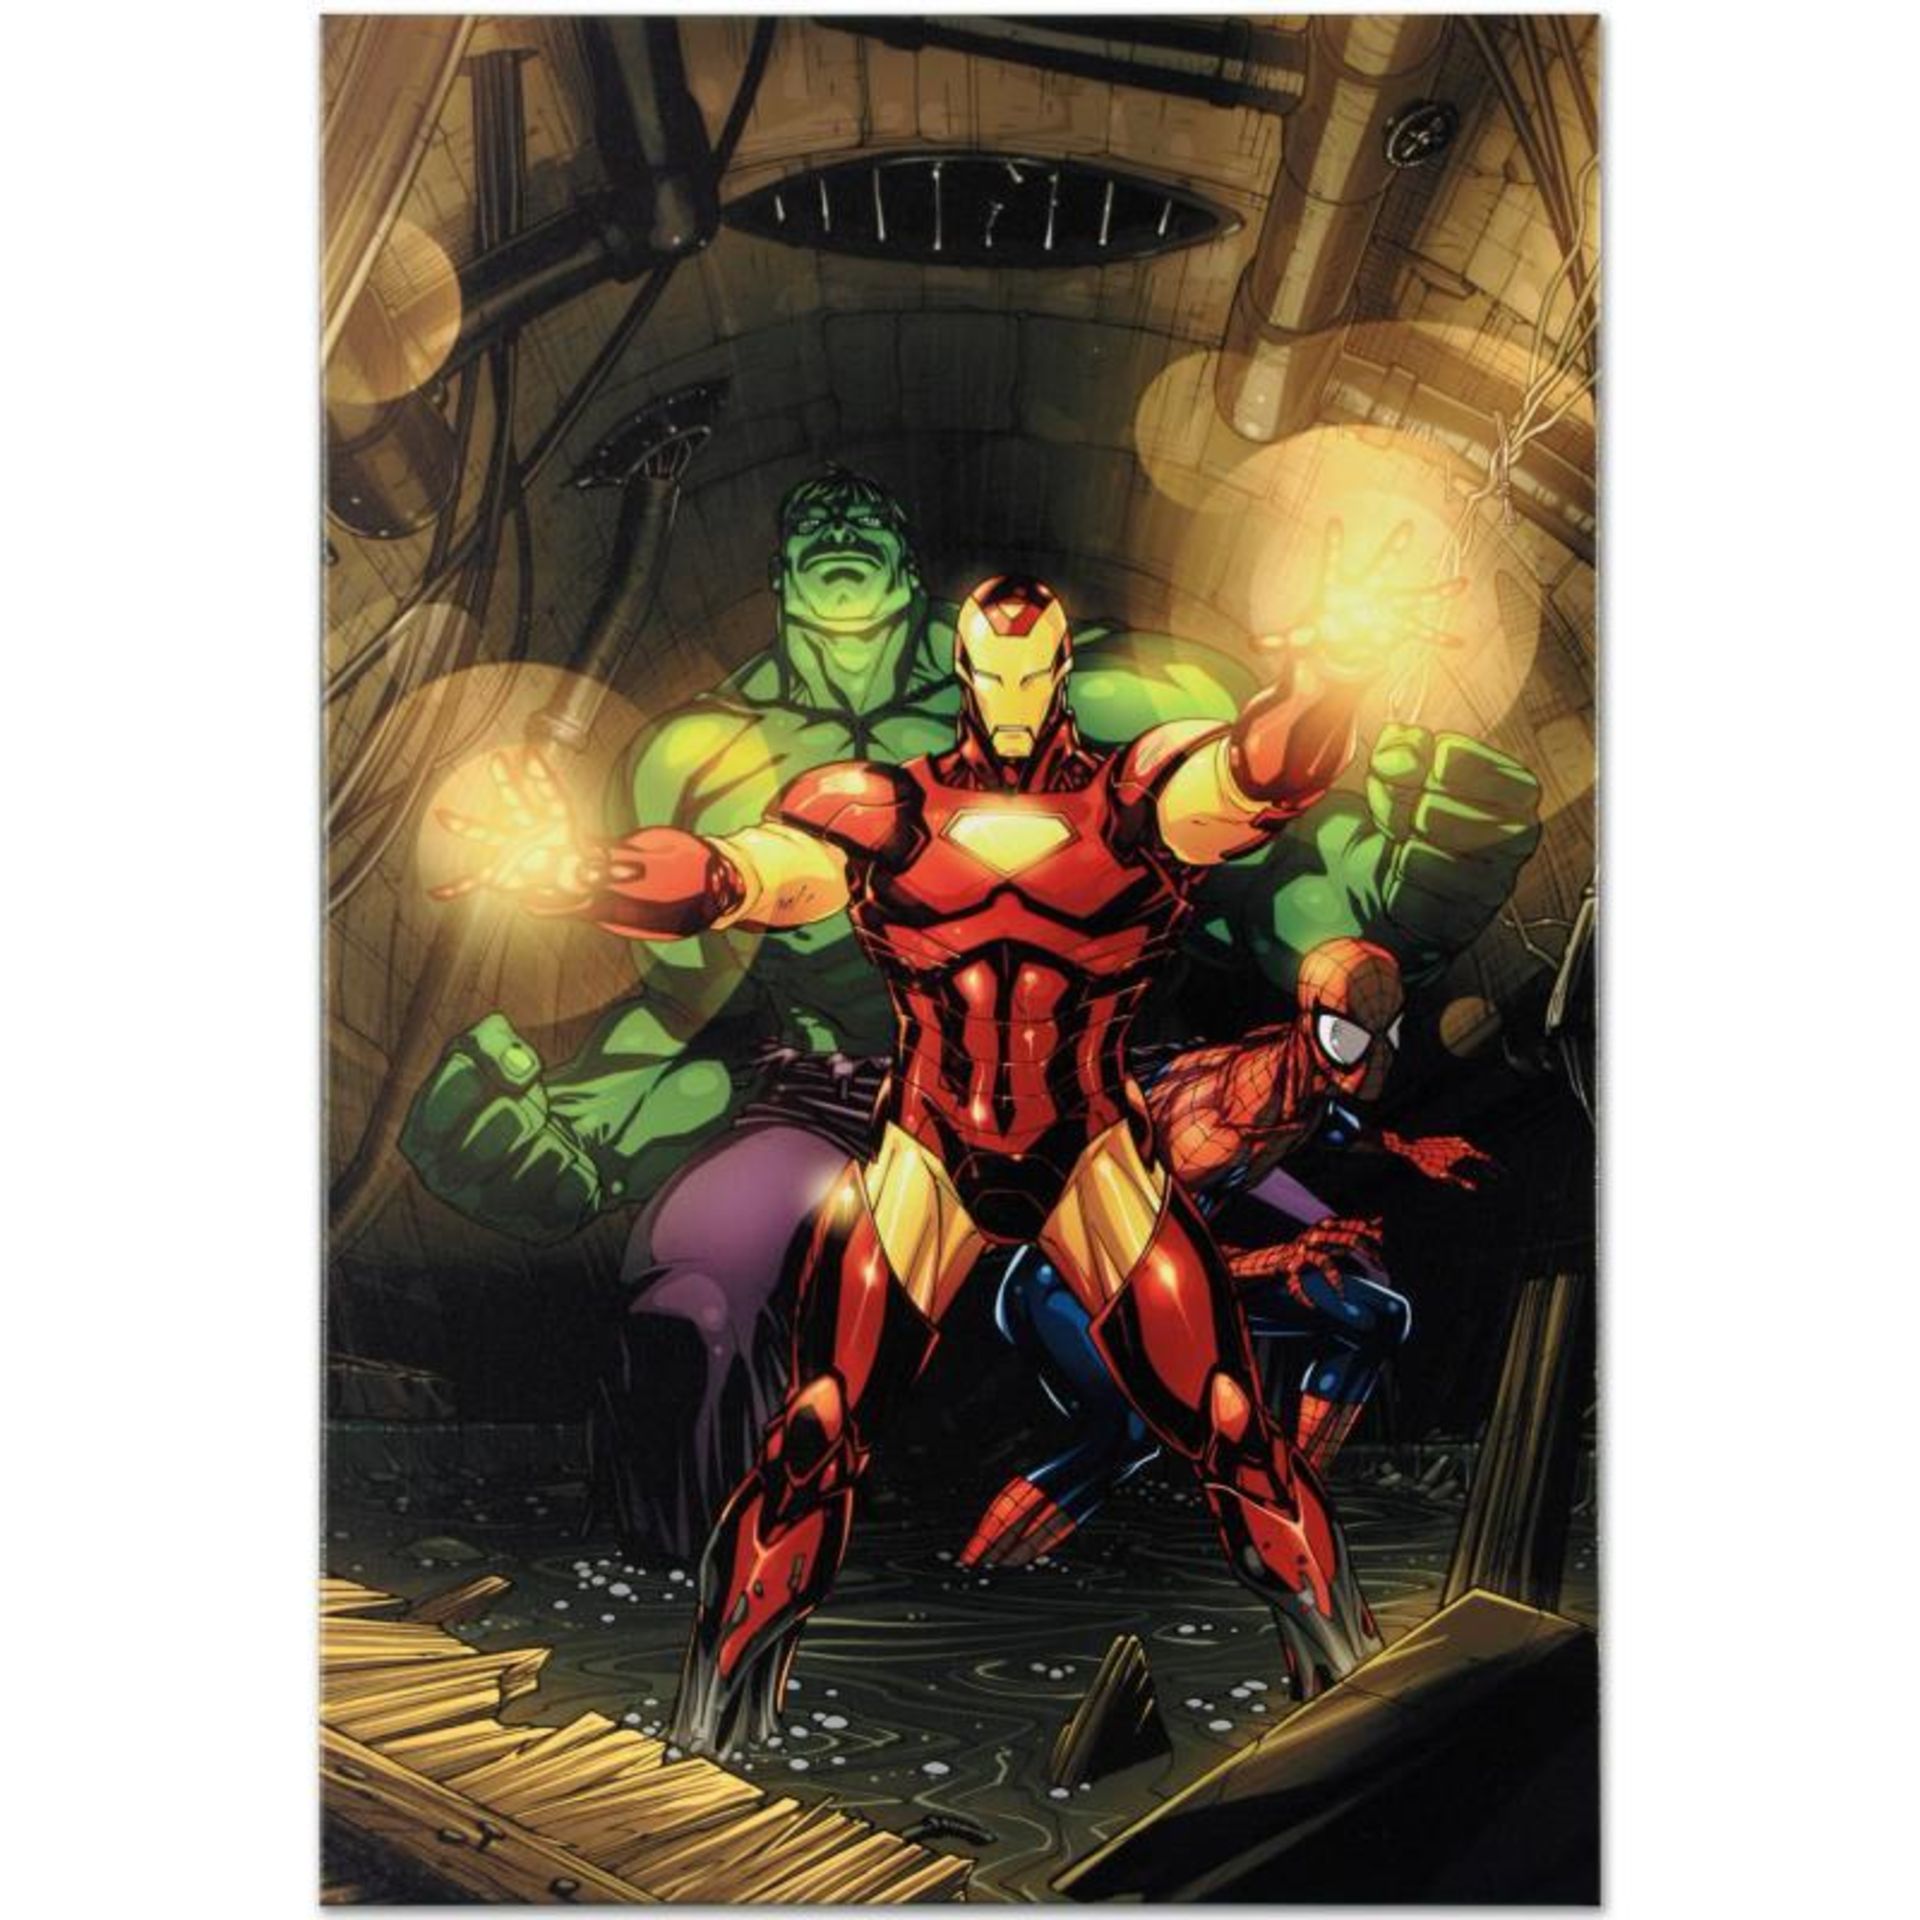 Marvel Comics "Secret Invasion #7" Numbered Limited Edition Giclee on Canvas by